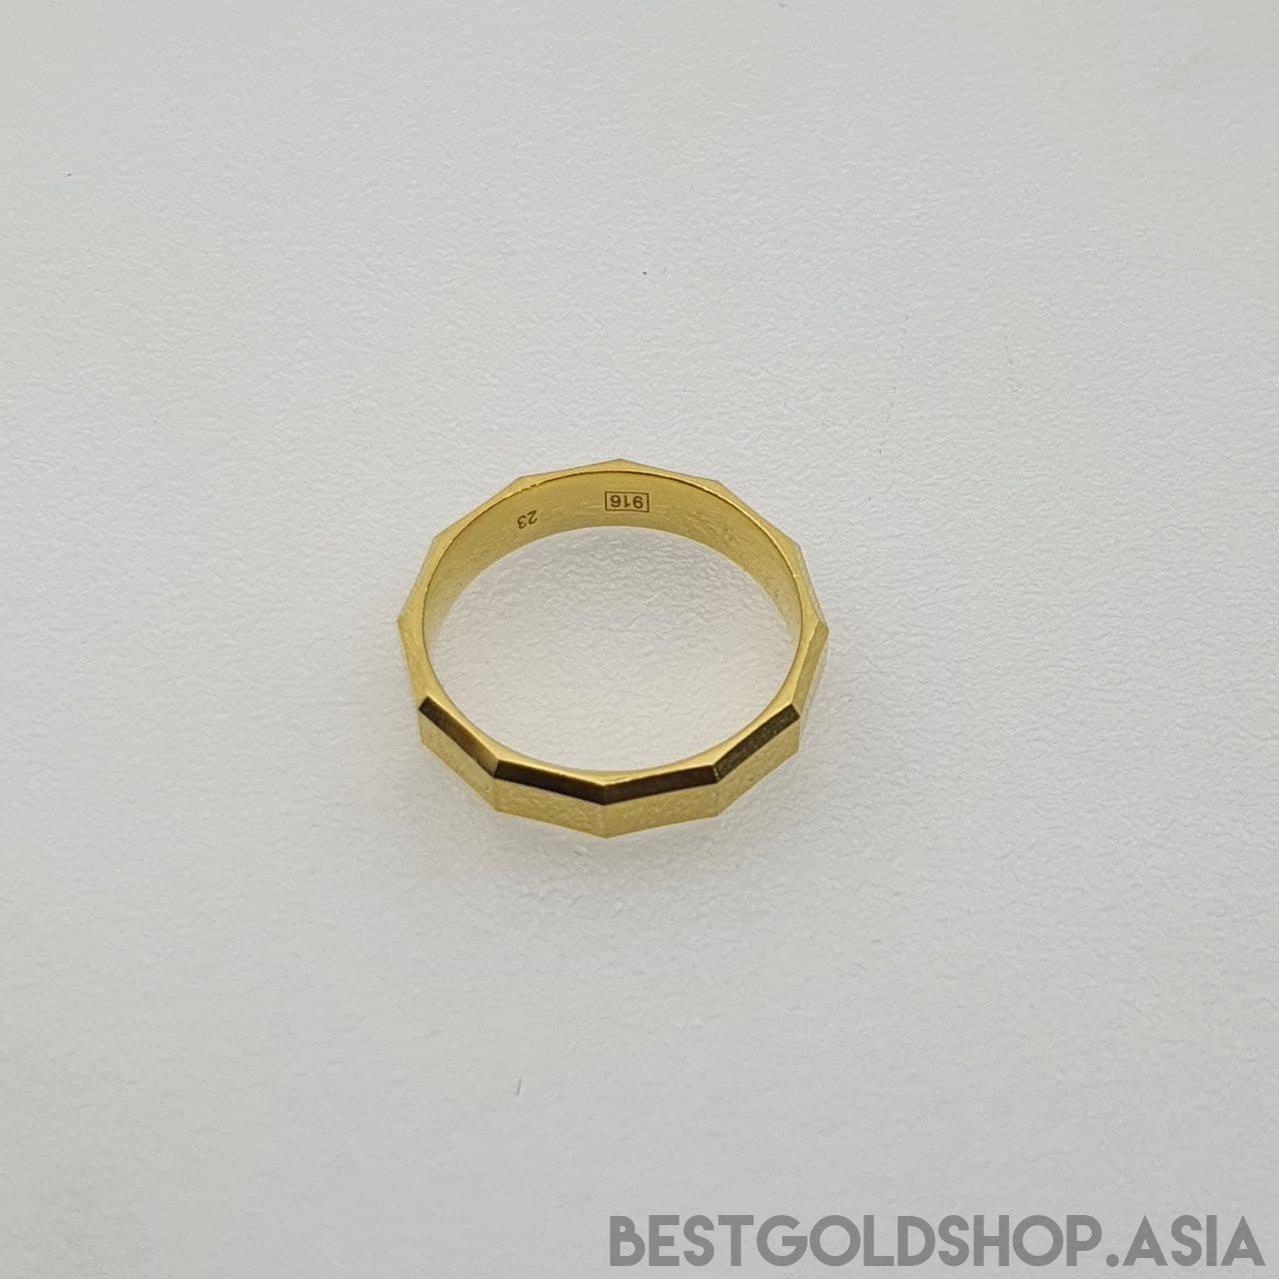 22k / 916 Gold Decagon Ring (smooth finish)-916 gold-Best Gold Shop